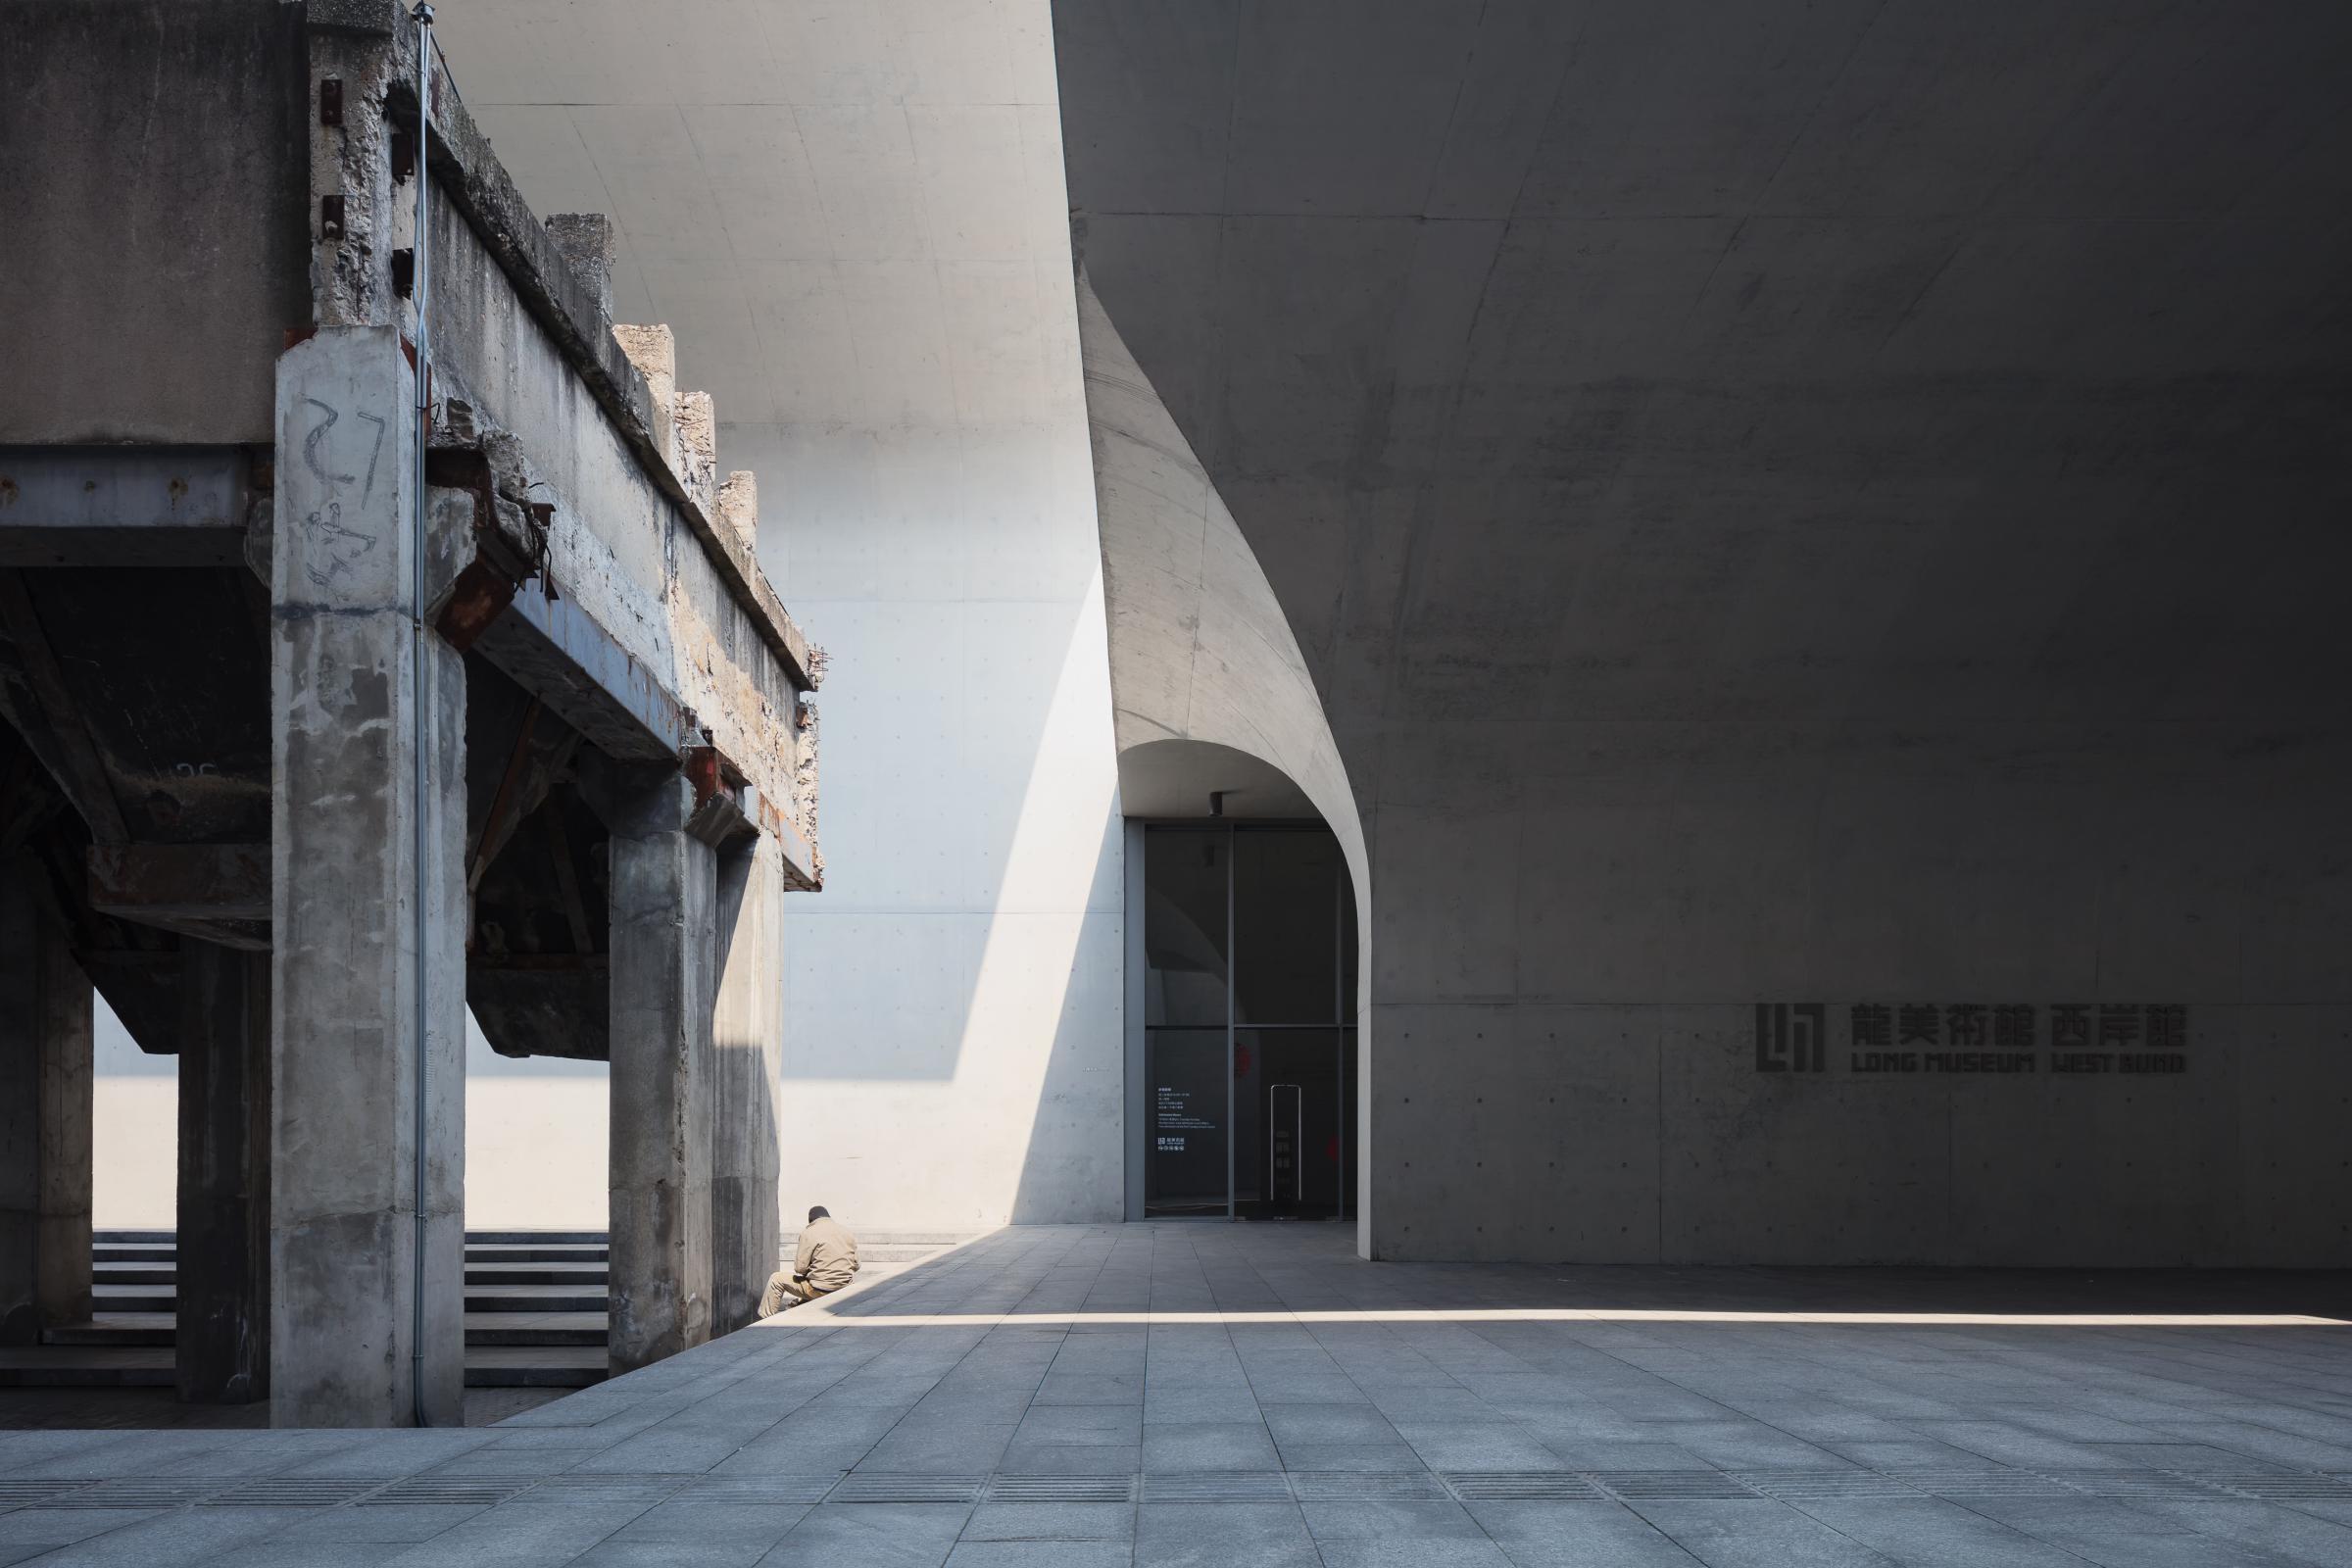 Photograph of Long Museum West Bund, designed by Atelier Deshaus and located in Shanghai, China